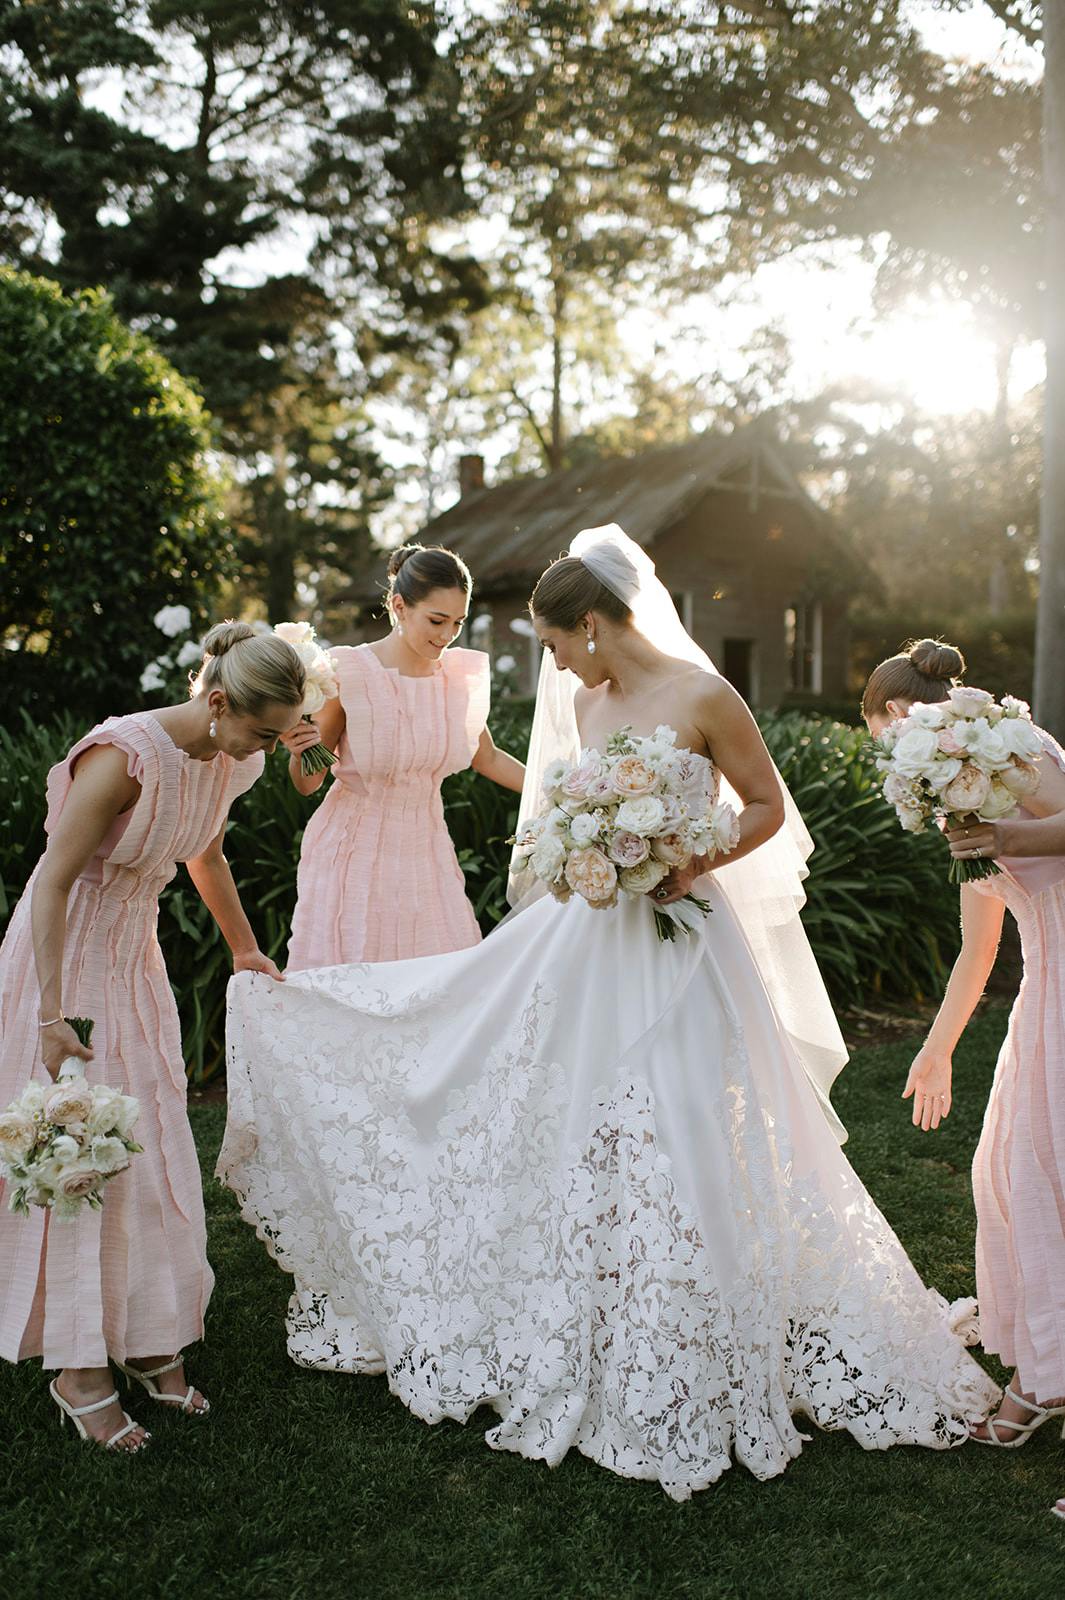 A bride in a white lace wedding gown and veil is surrounded by three bridesmaids in light pink dresses. They are outdoors on a grassy area with sunlight filtering through trees. The bridesmaids are helping to arrange the bride's dress as she holds a bouquet of white flowers.